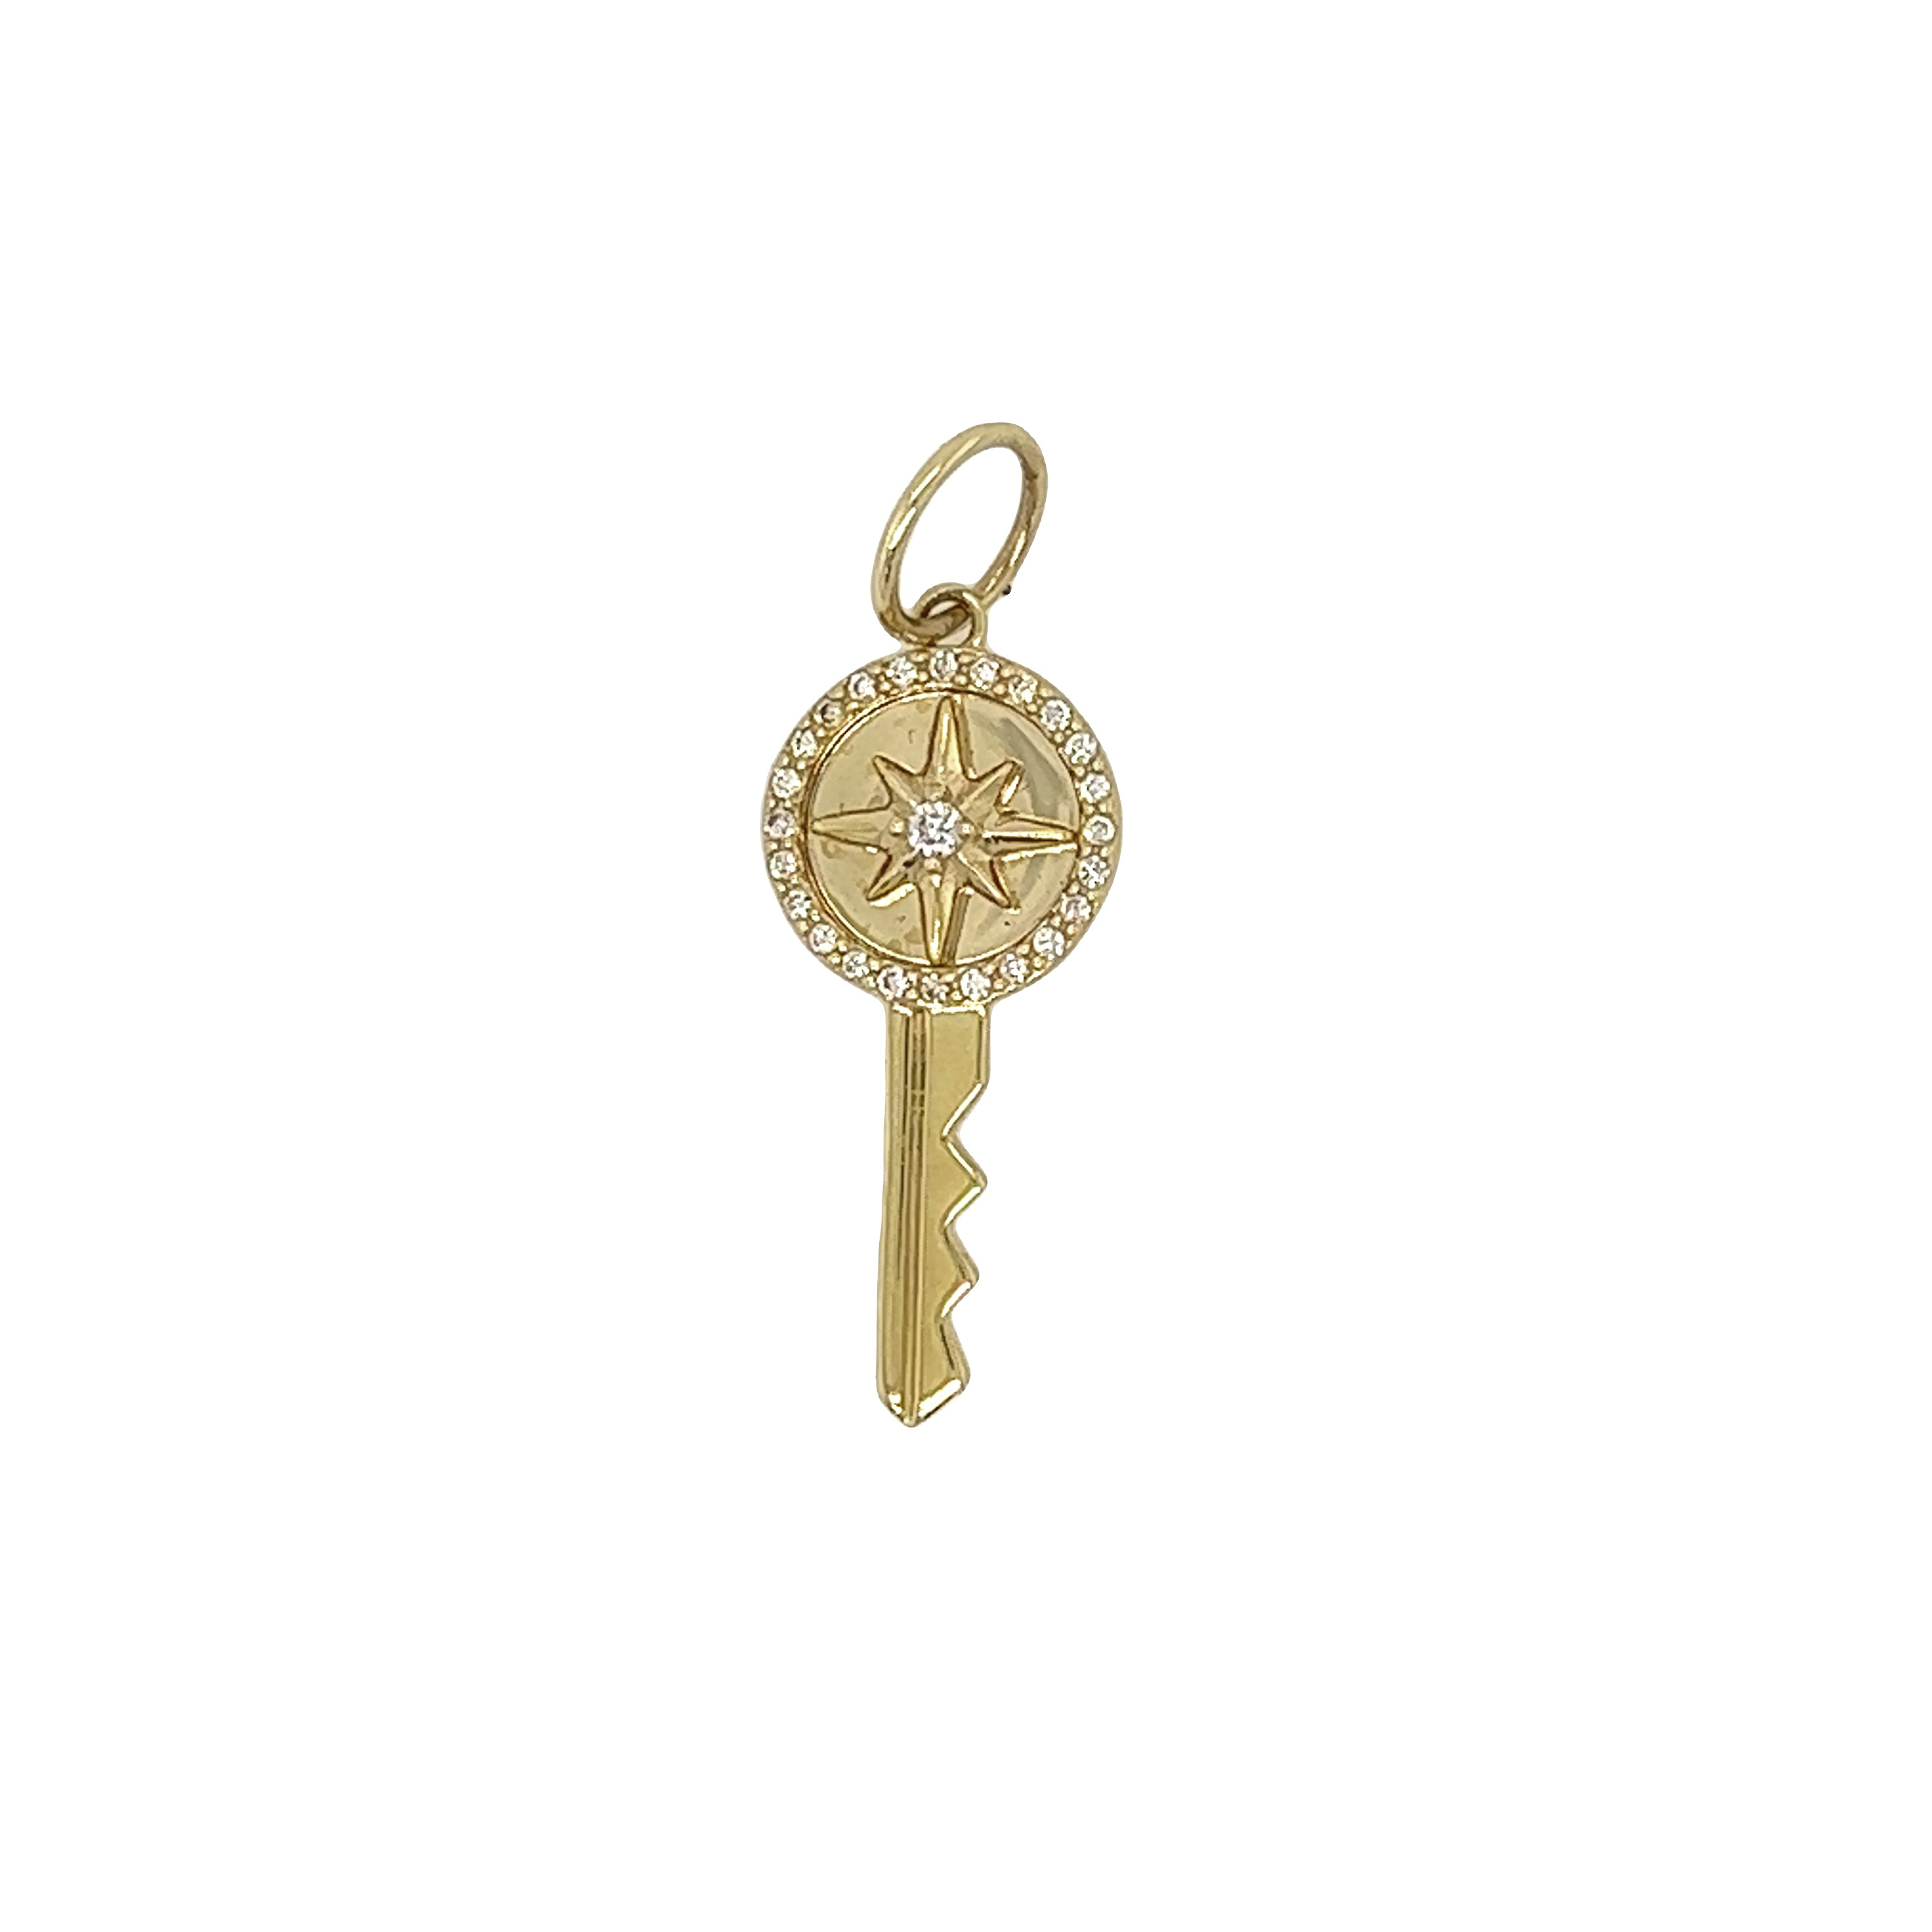 Featured image for “Compass Key Pendant”